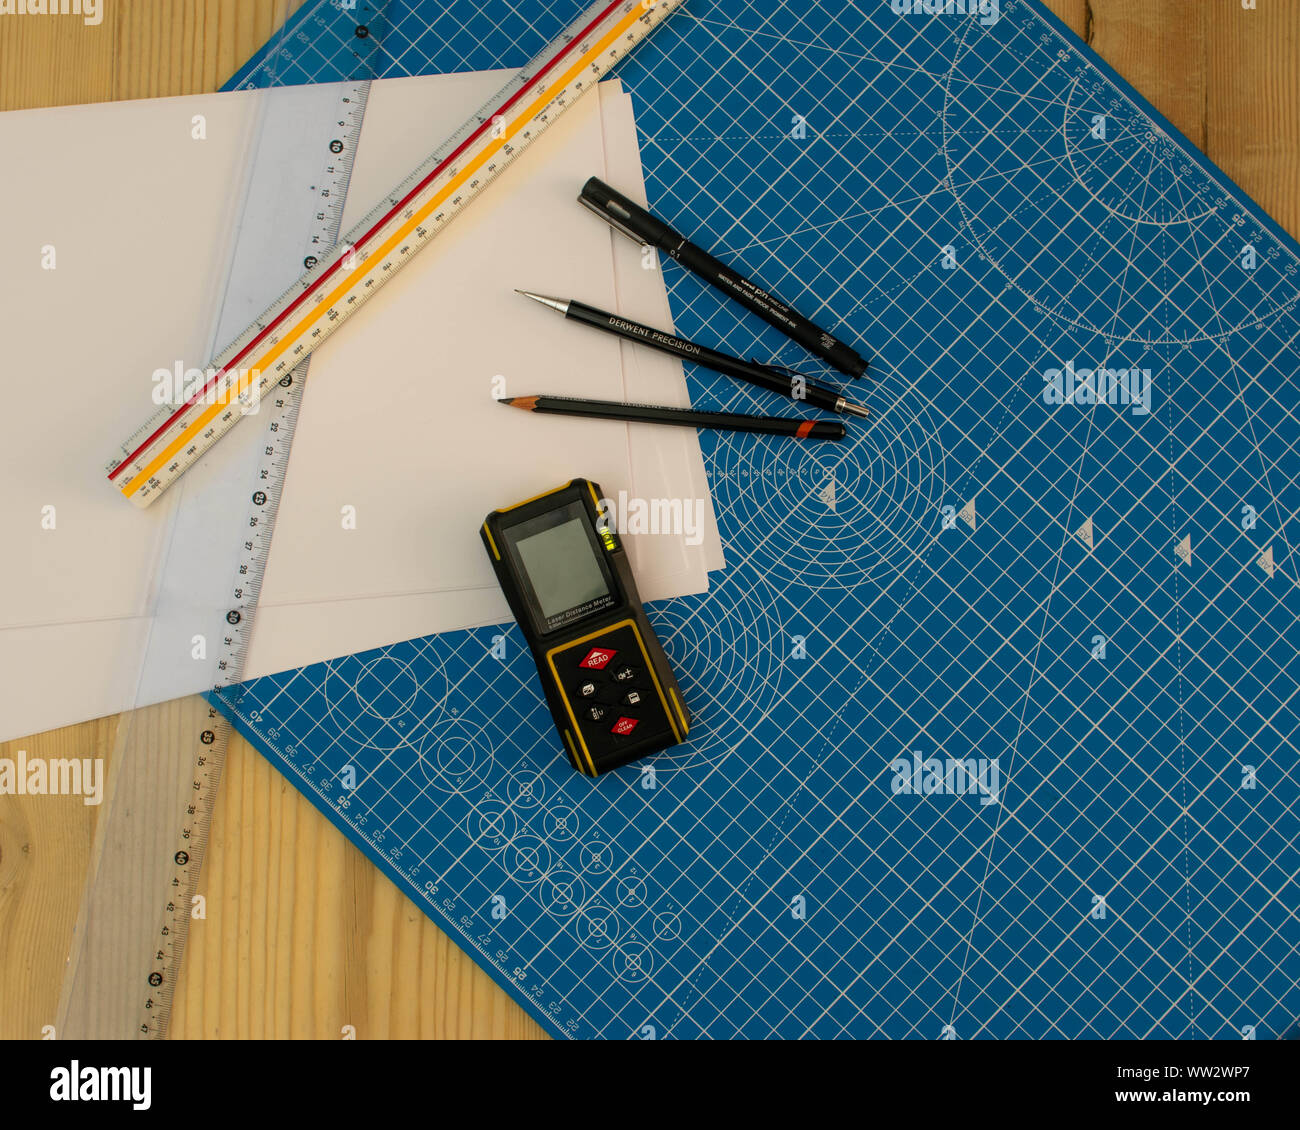 Technical drawing design work space in close up flat lay image Stock Photo